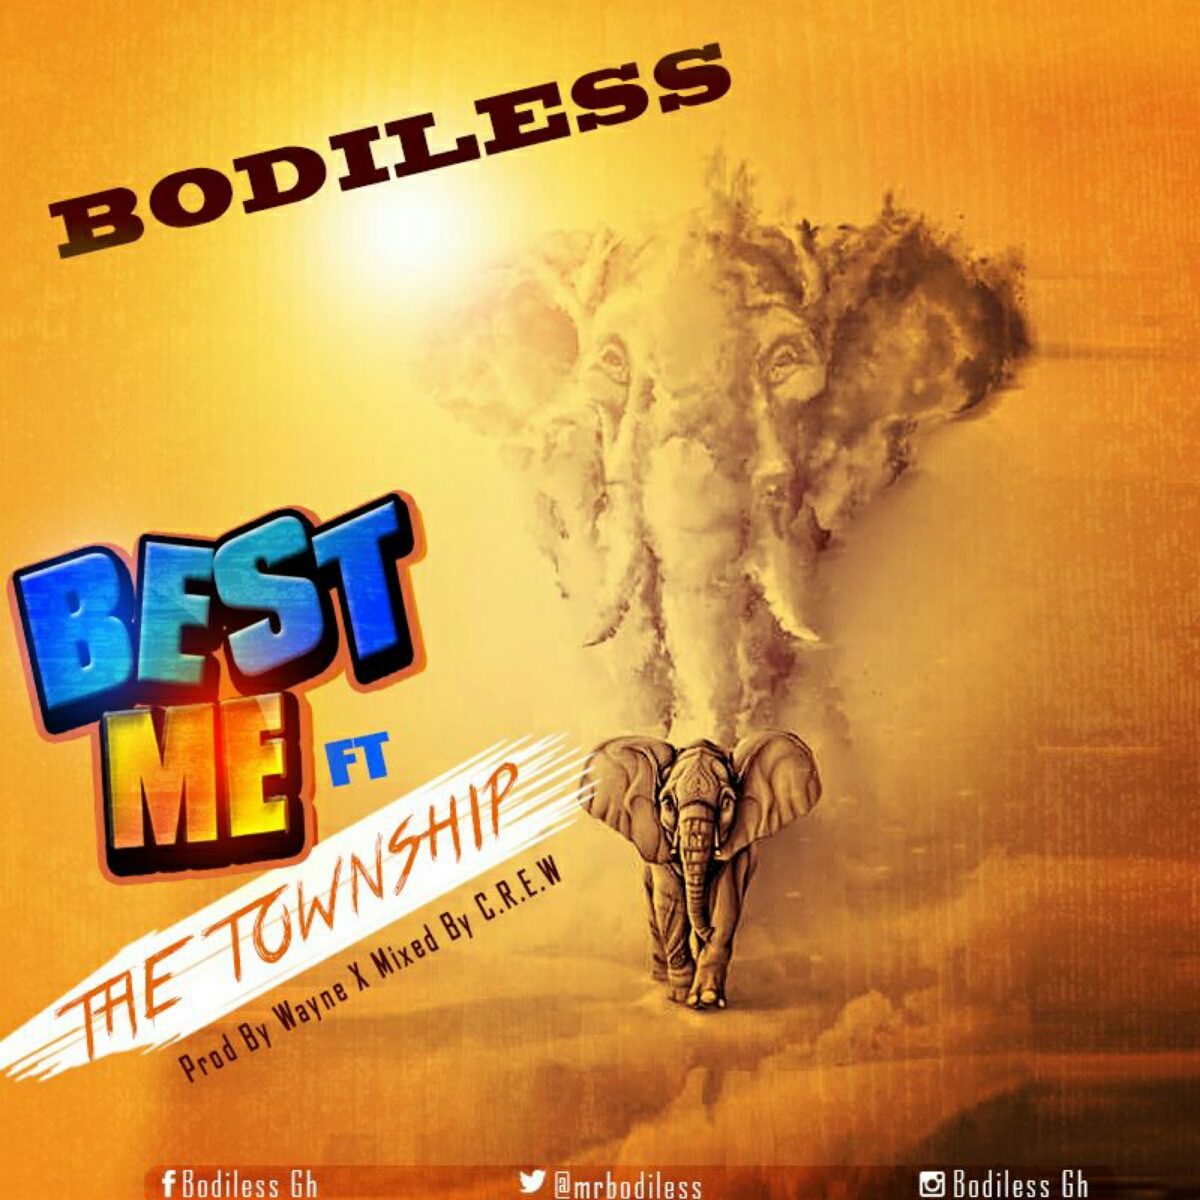 [MUSIC]: Bodiless ft. The Township-